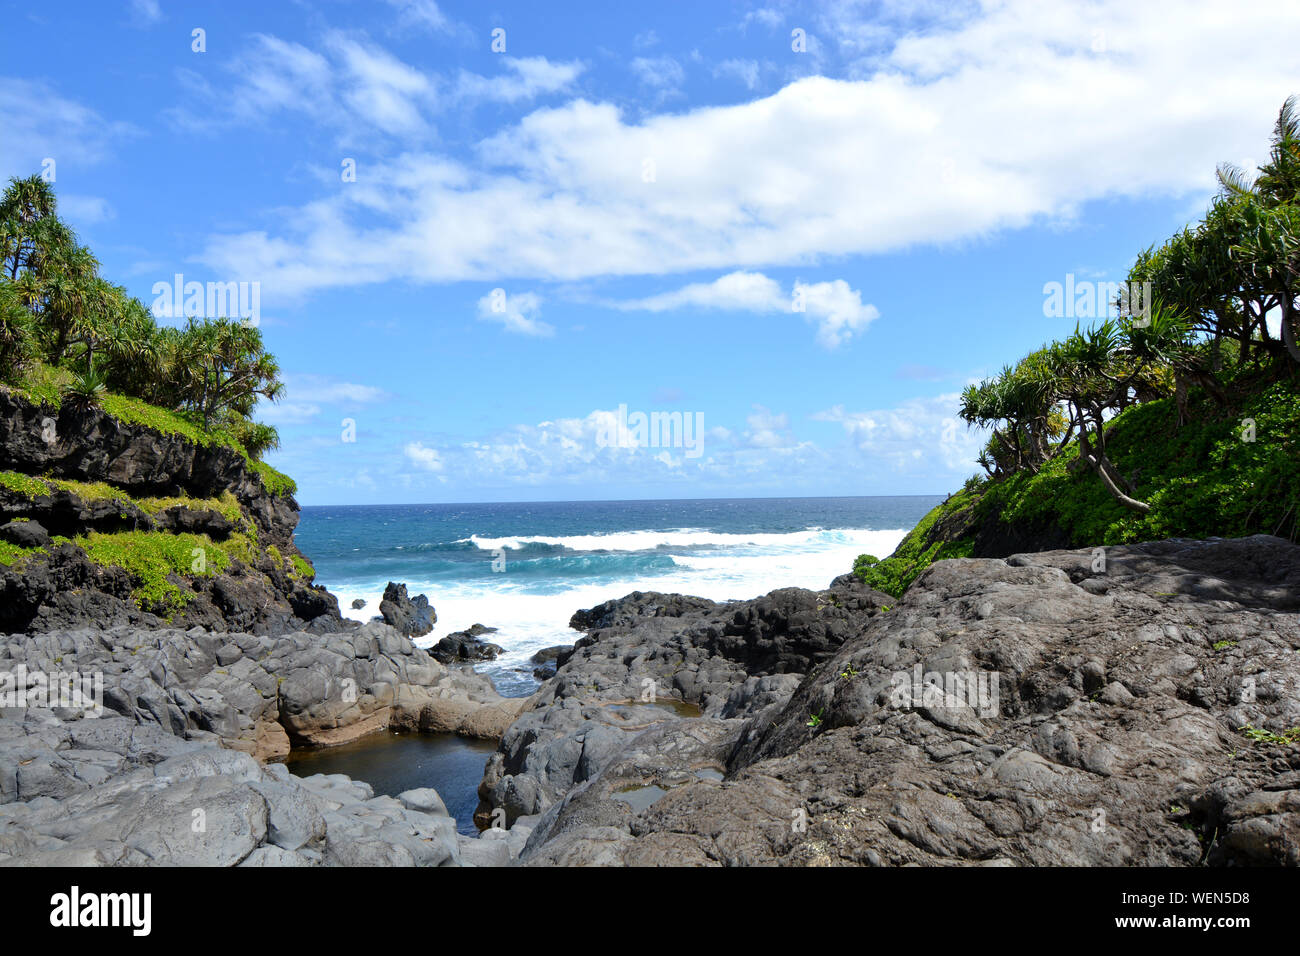 Volcanic rock beach in remote areas of an island Stock Photo